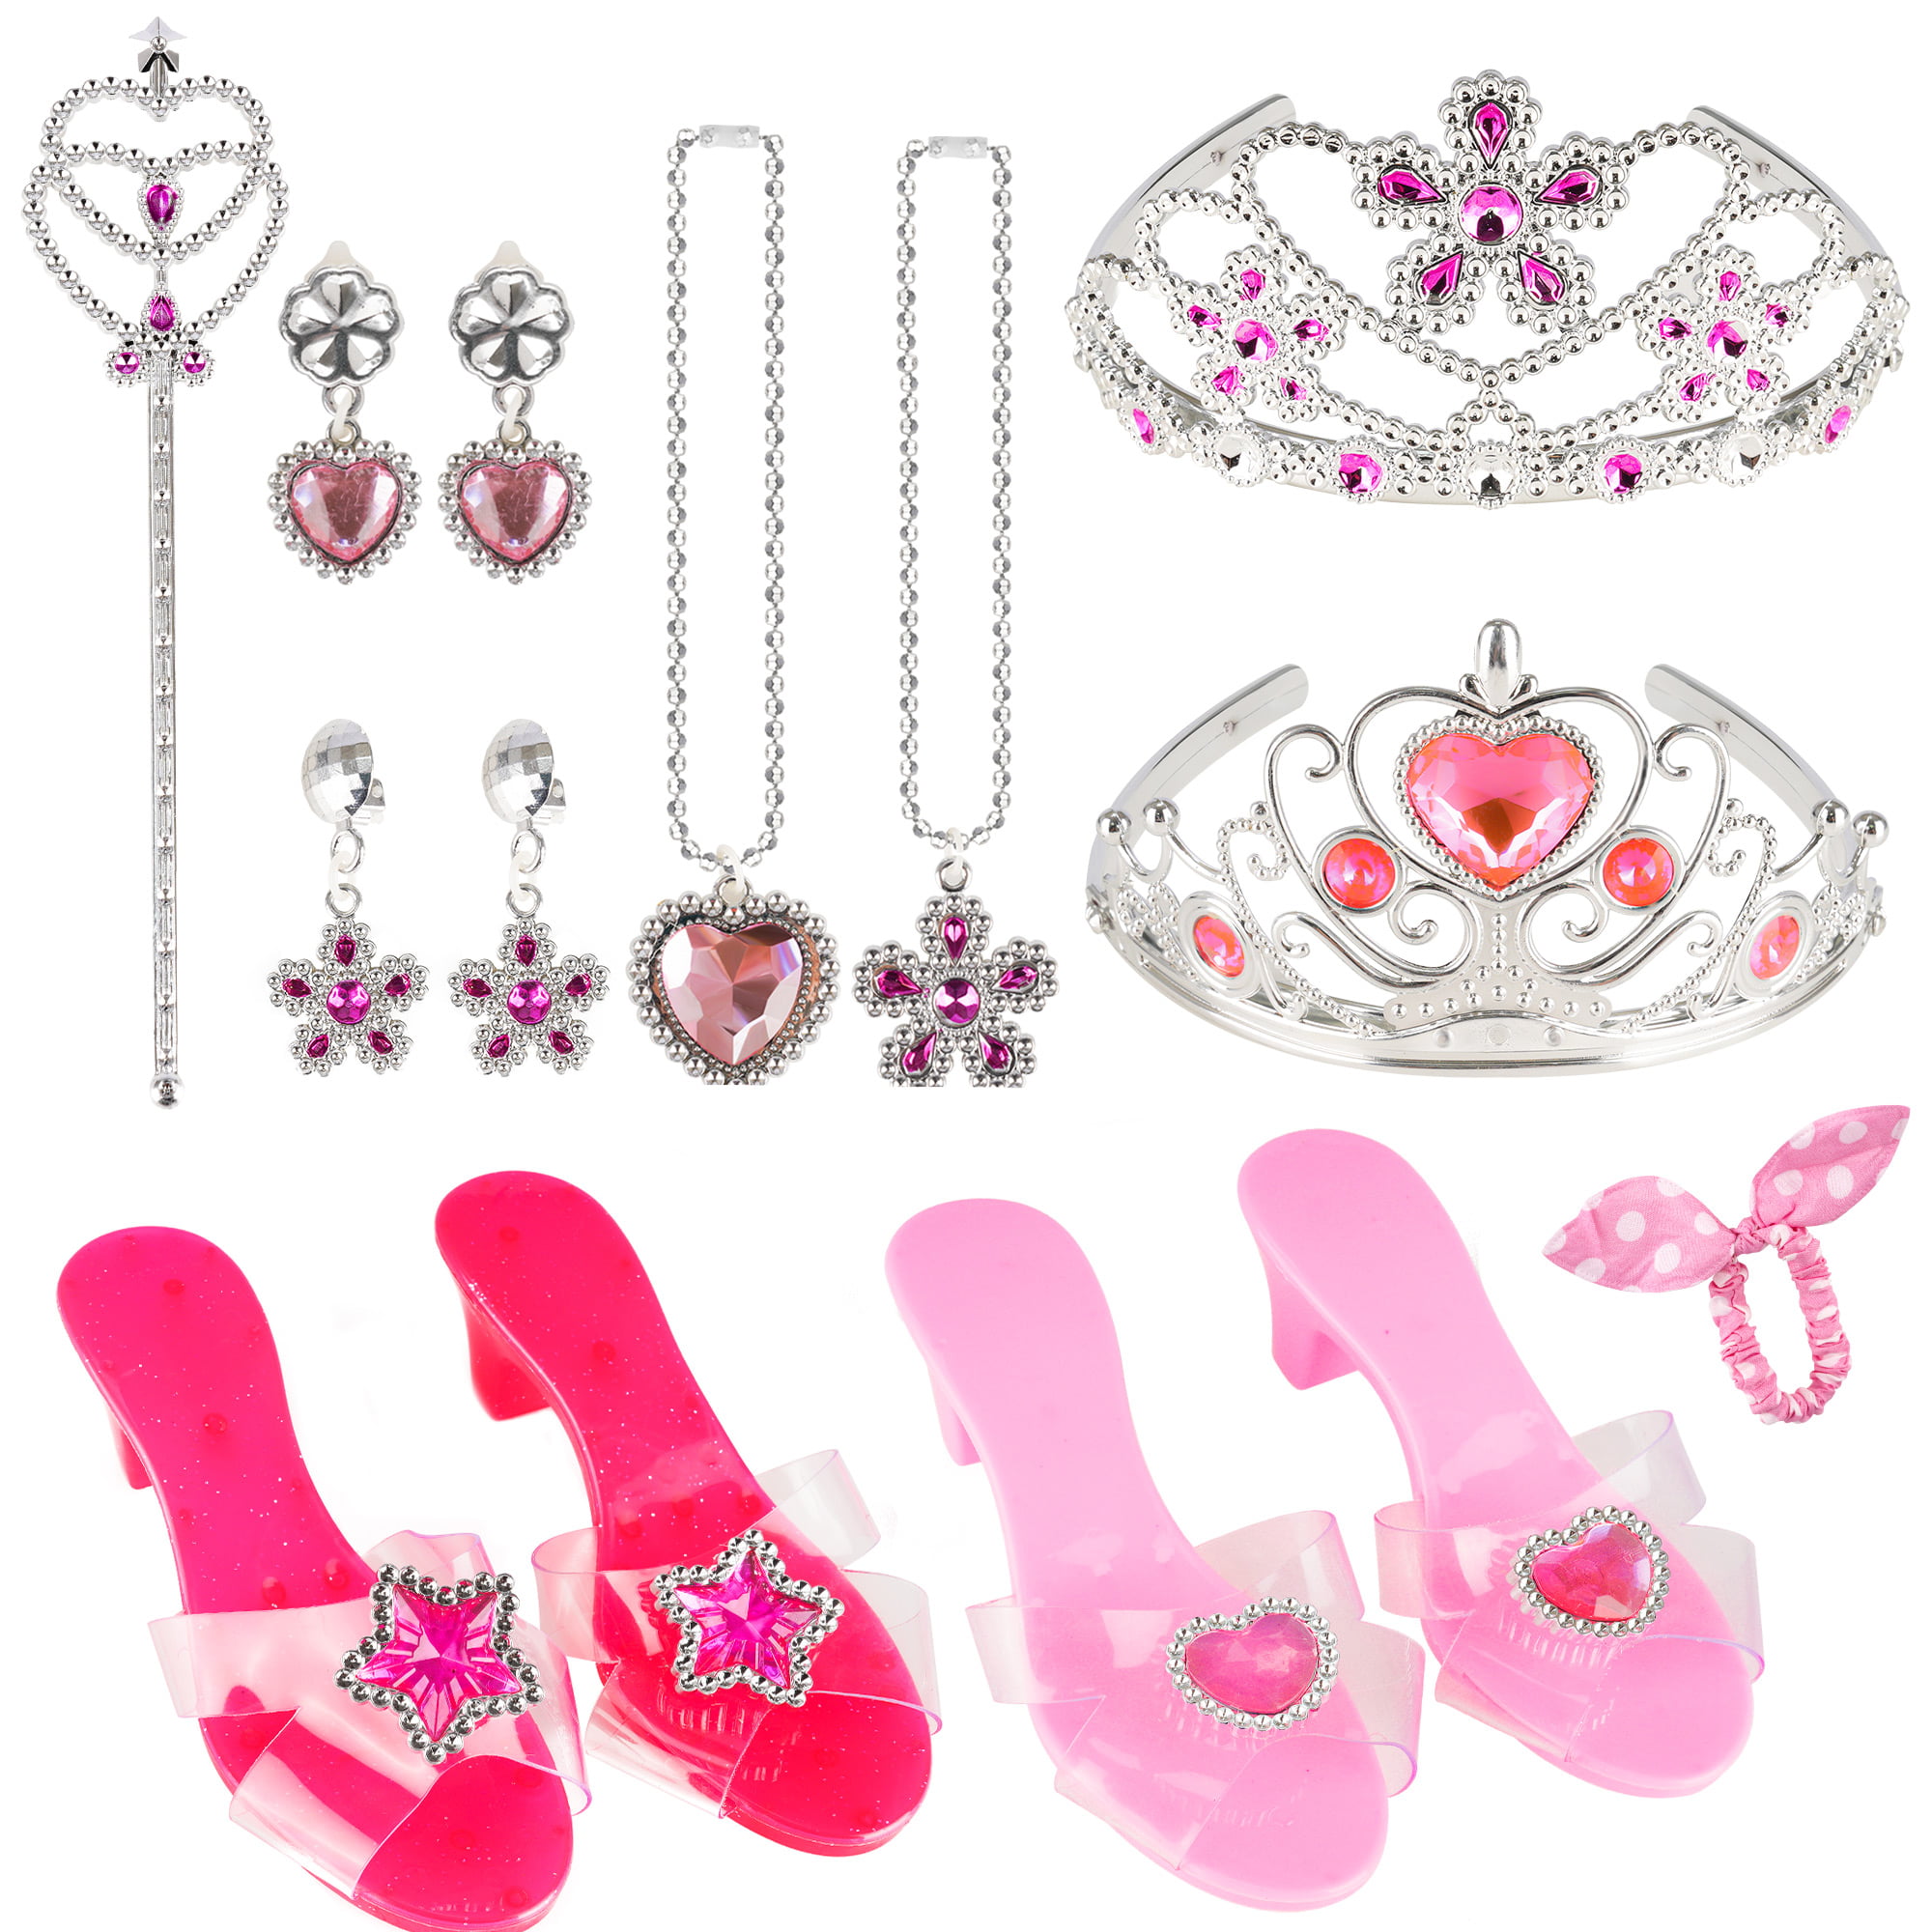 Princess Toys – Dress Up Shoes and Jewelry Boutique Set with 3 Pretend Play  Shoes, Tiara, Wand, Necklace, Earrings for Girls 3 4 5 6 7 8 year old Kids  